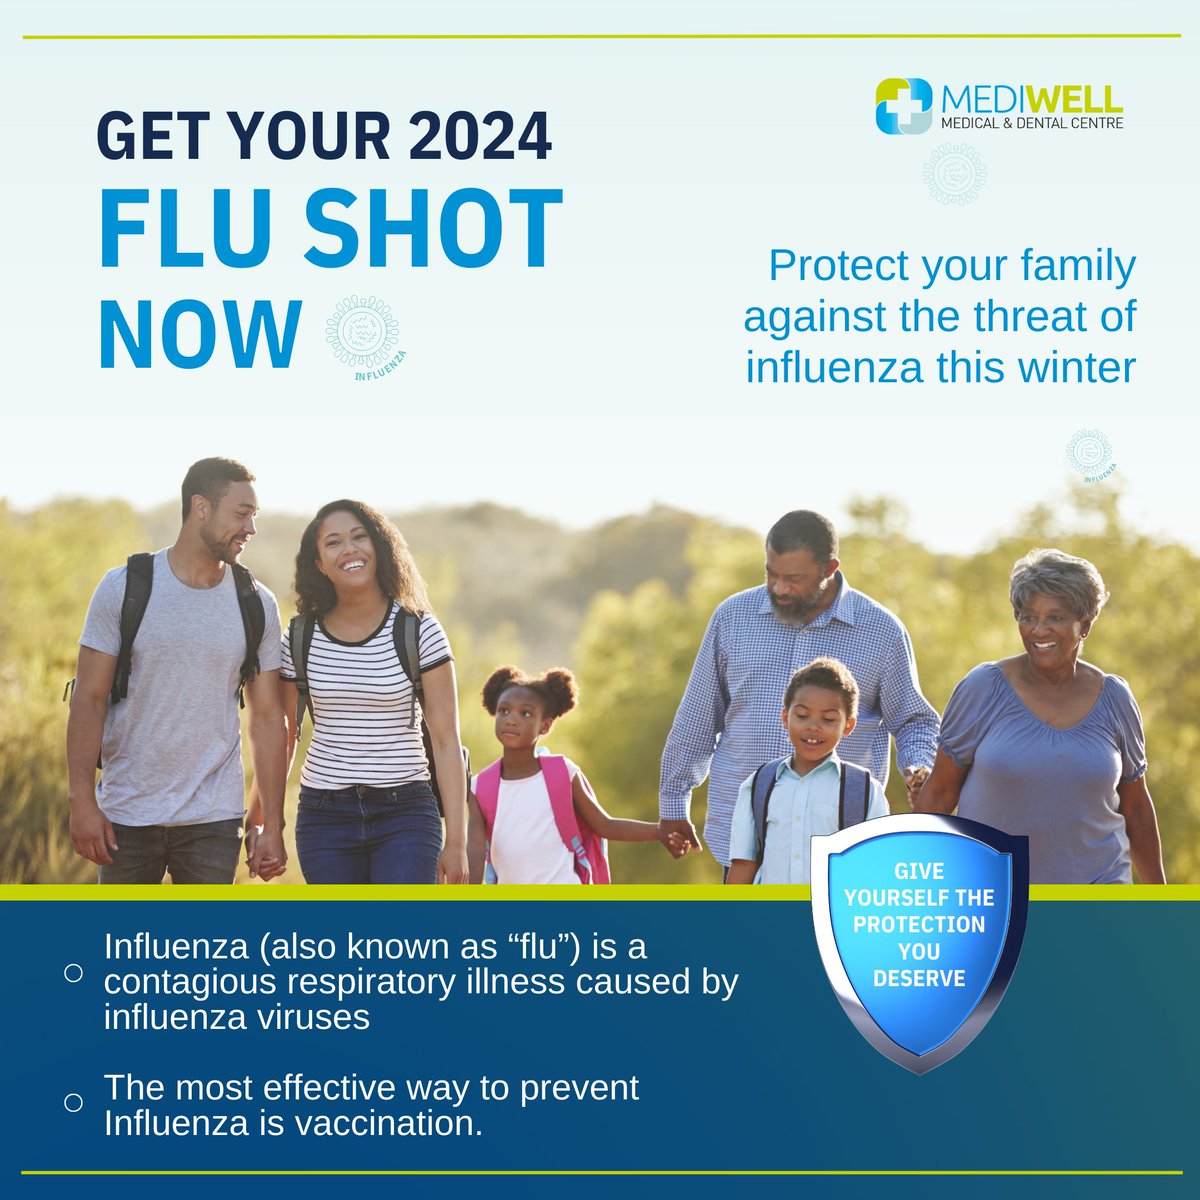 Protect your family this winter! Get your 2024 flu shot now to guard against influenza. Book your appointment today for the most effective prevention.

Appointment Booking:
Link: mediwell.co.za/appointment
Tel: 011 300 2900
WhatsApp: 078 982 7284
#FluShot #InfluenzaVaccine #Mediwell